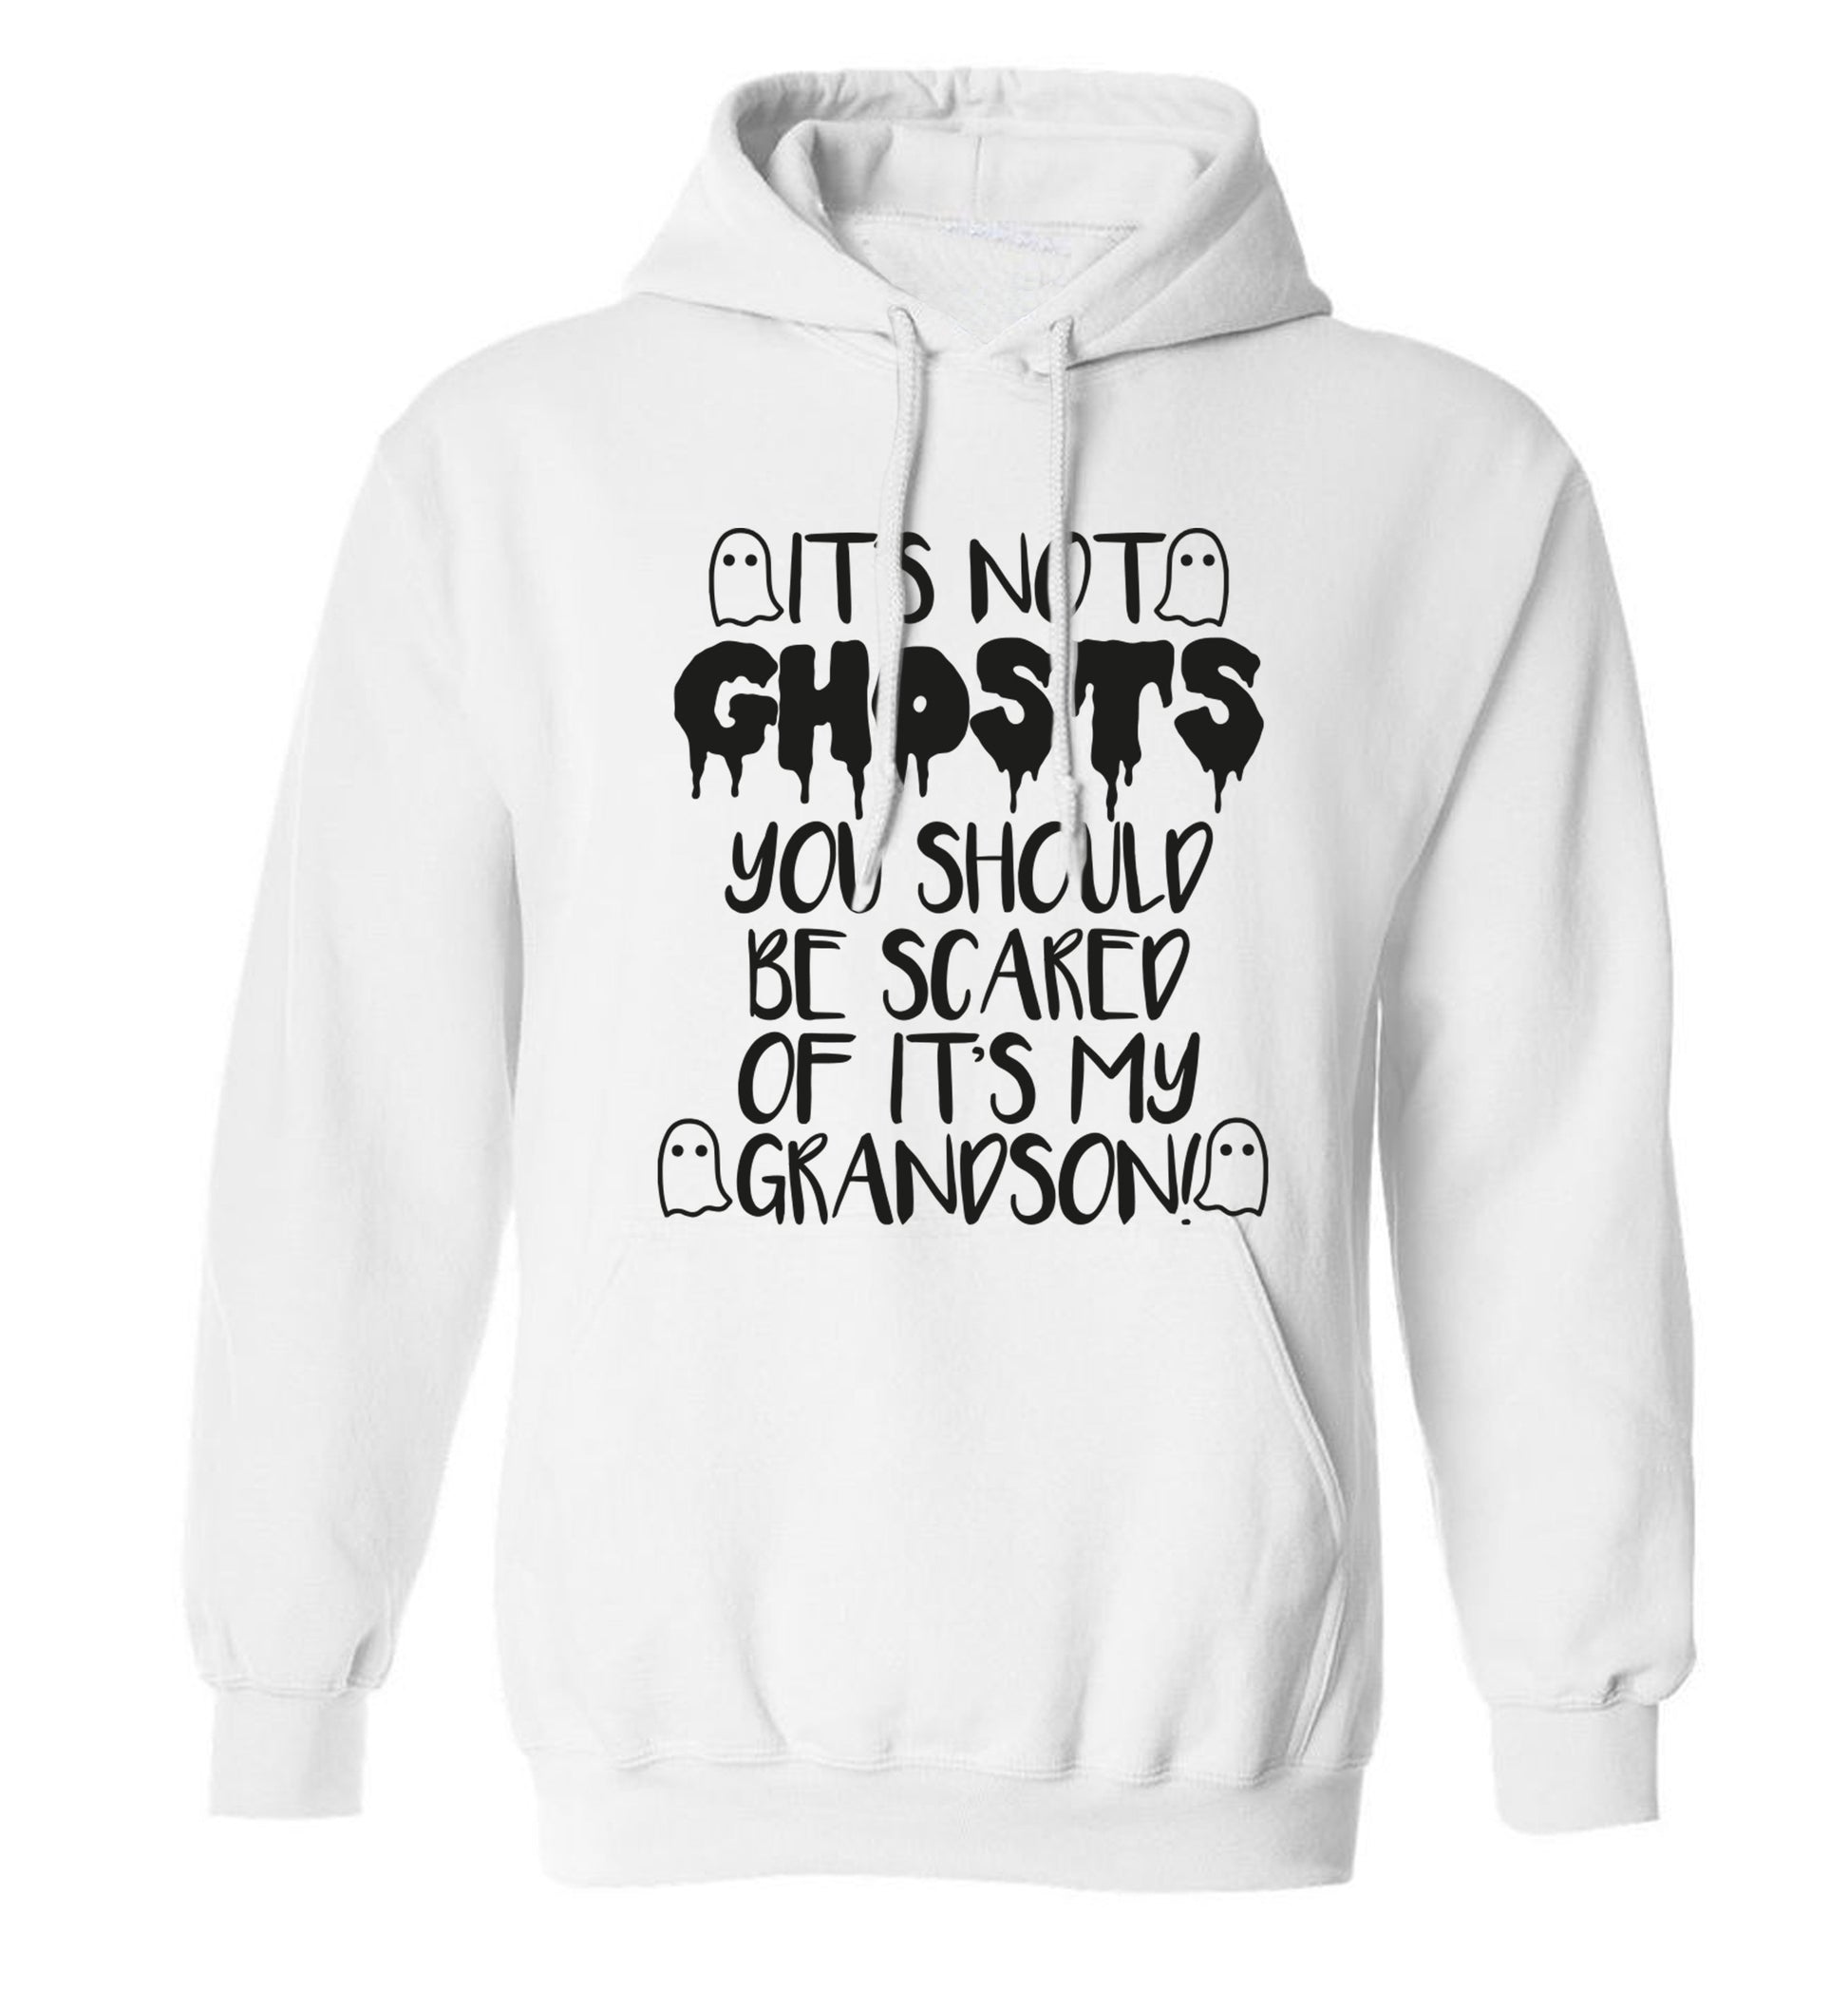 It's not ghosts you should be scared of it's my grandson! adults unisex white hoodie 2XL